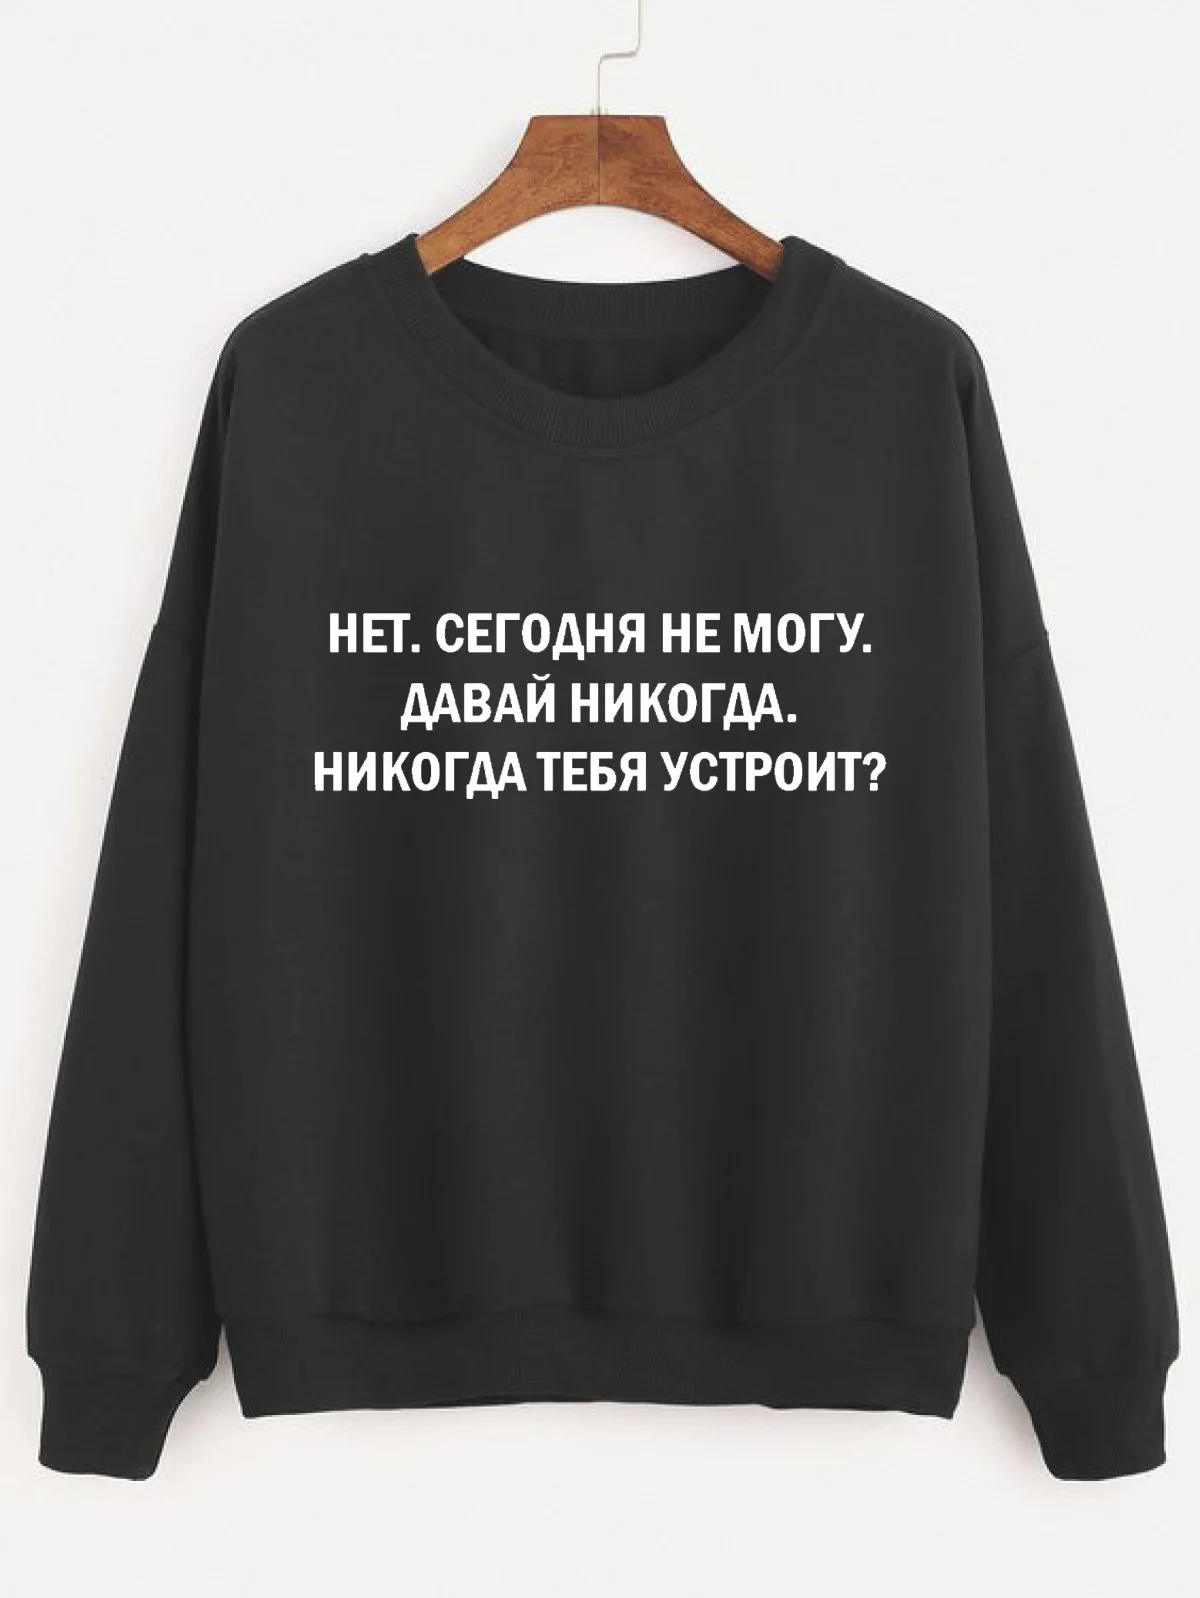 

Sweatshirt I can not today Funny Casual Russian Letter Long Sleeve Tumblr Cotton Unisex Hipster Harajuku Tops